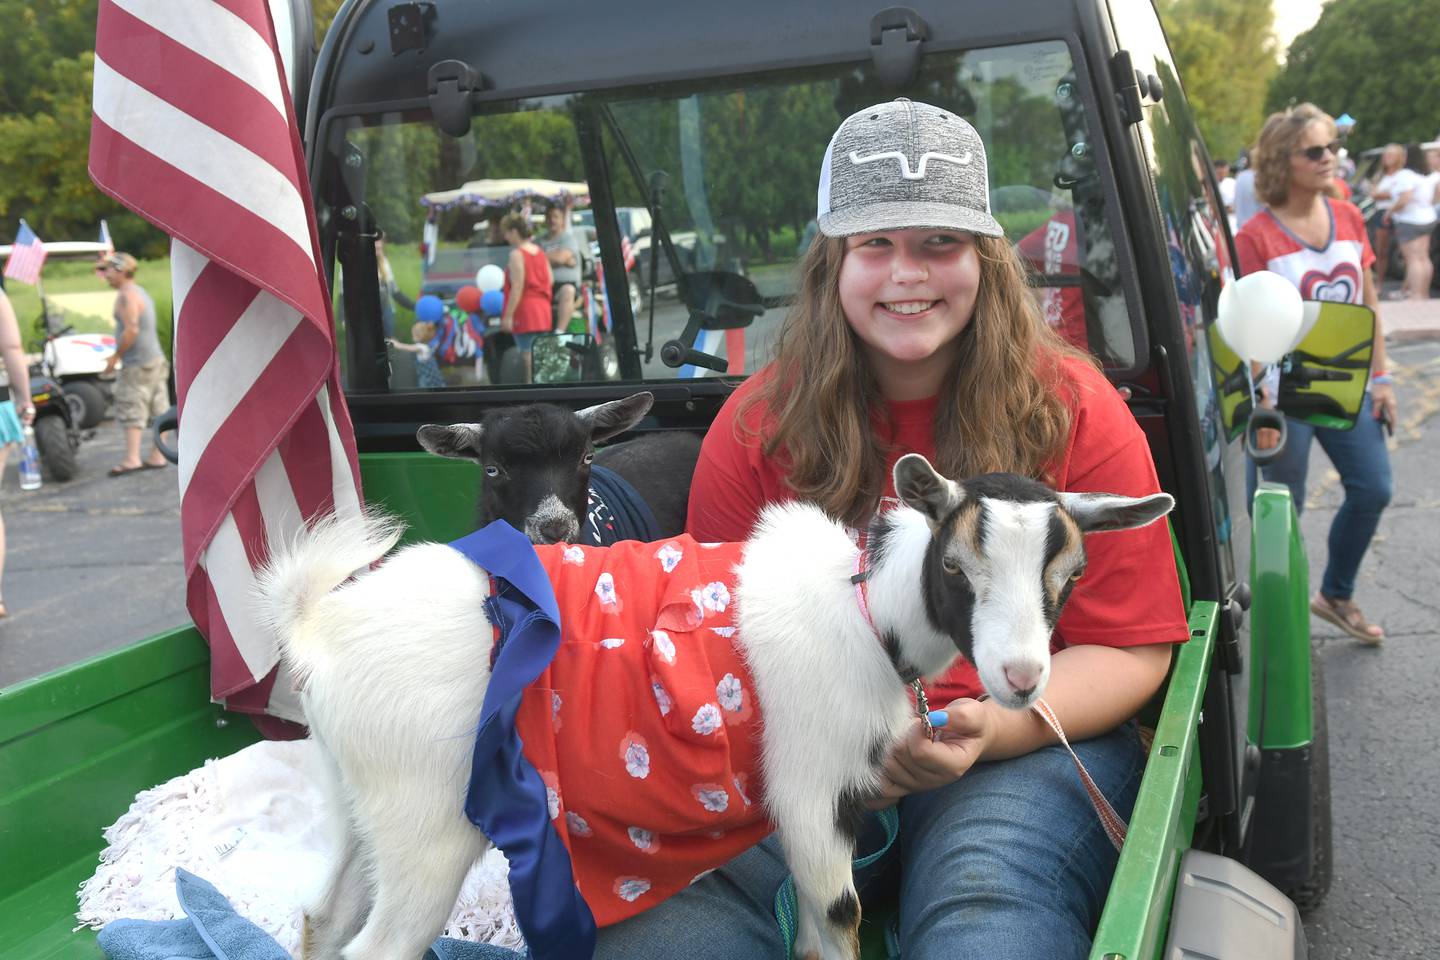 Jacklyn Heller rode in the back of her family's John Deere ATV gator with her two "kids" Deliah and Zion.